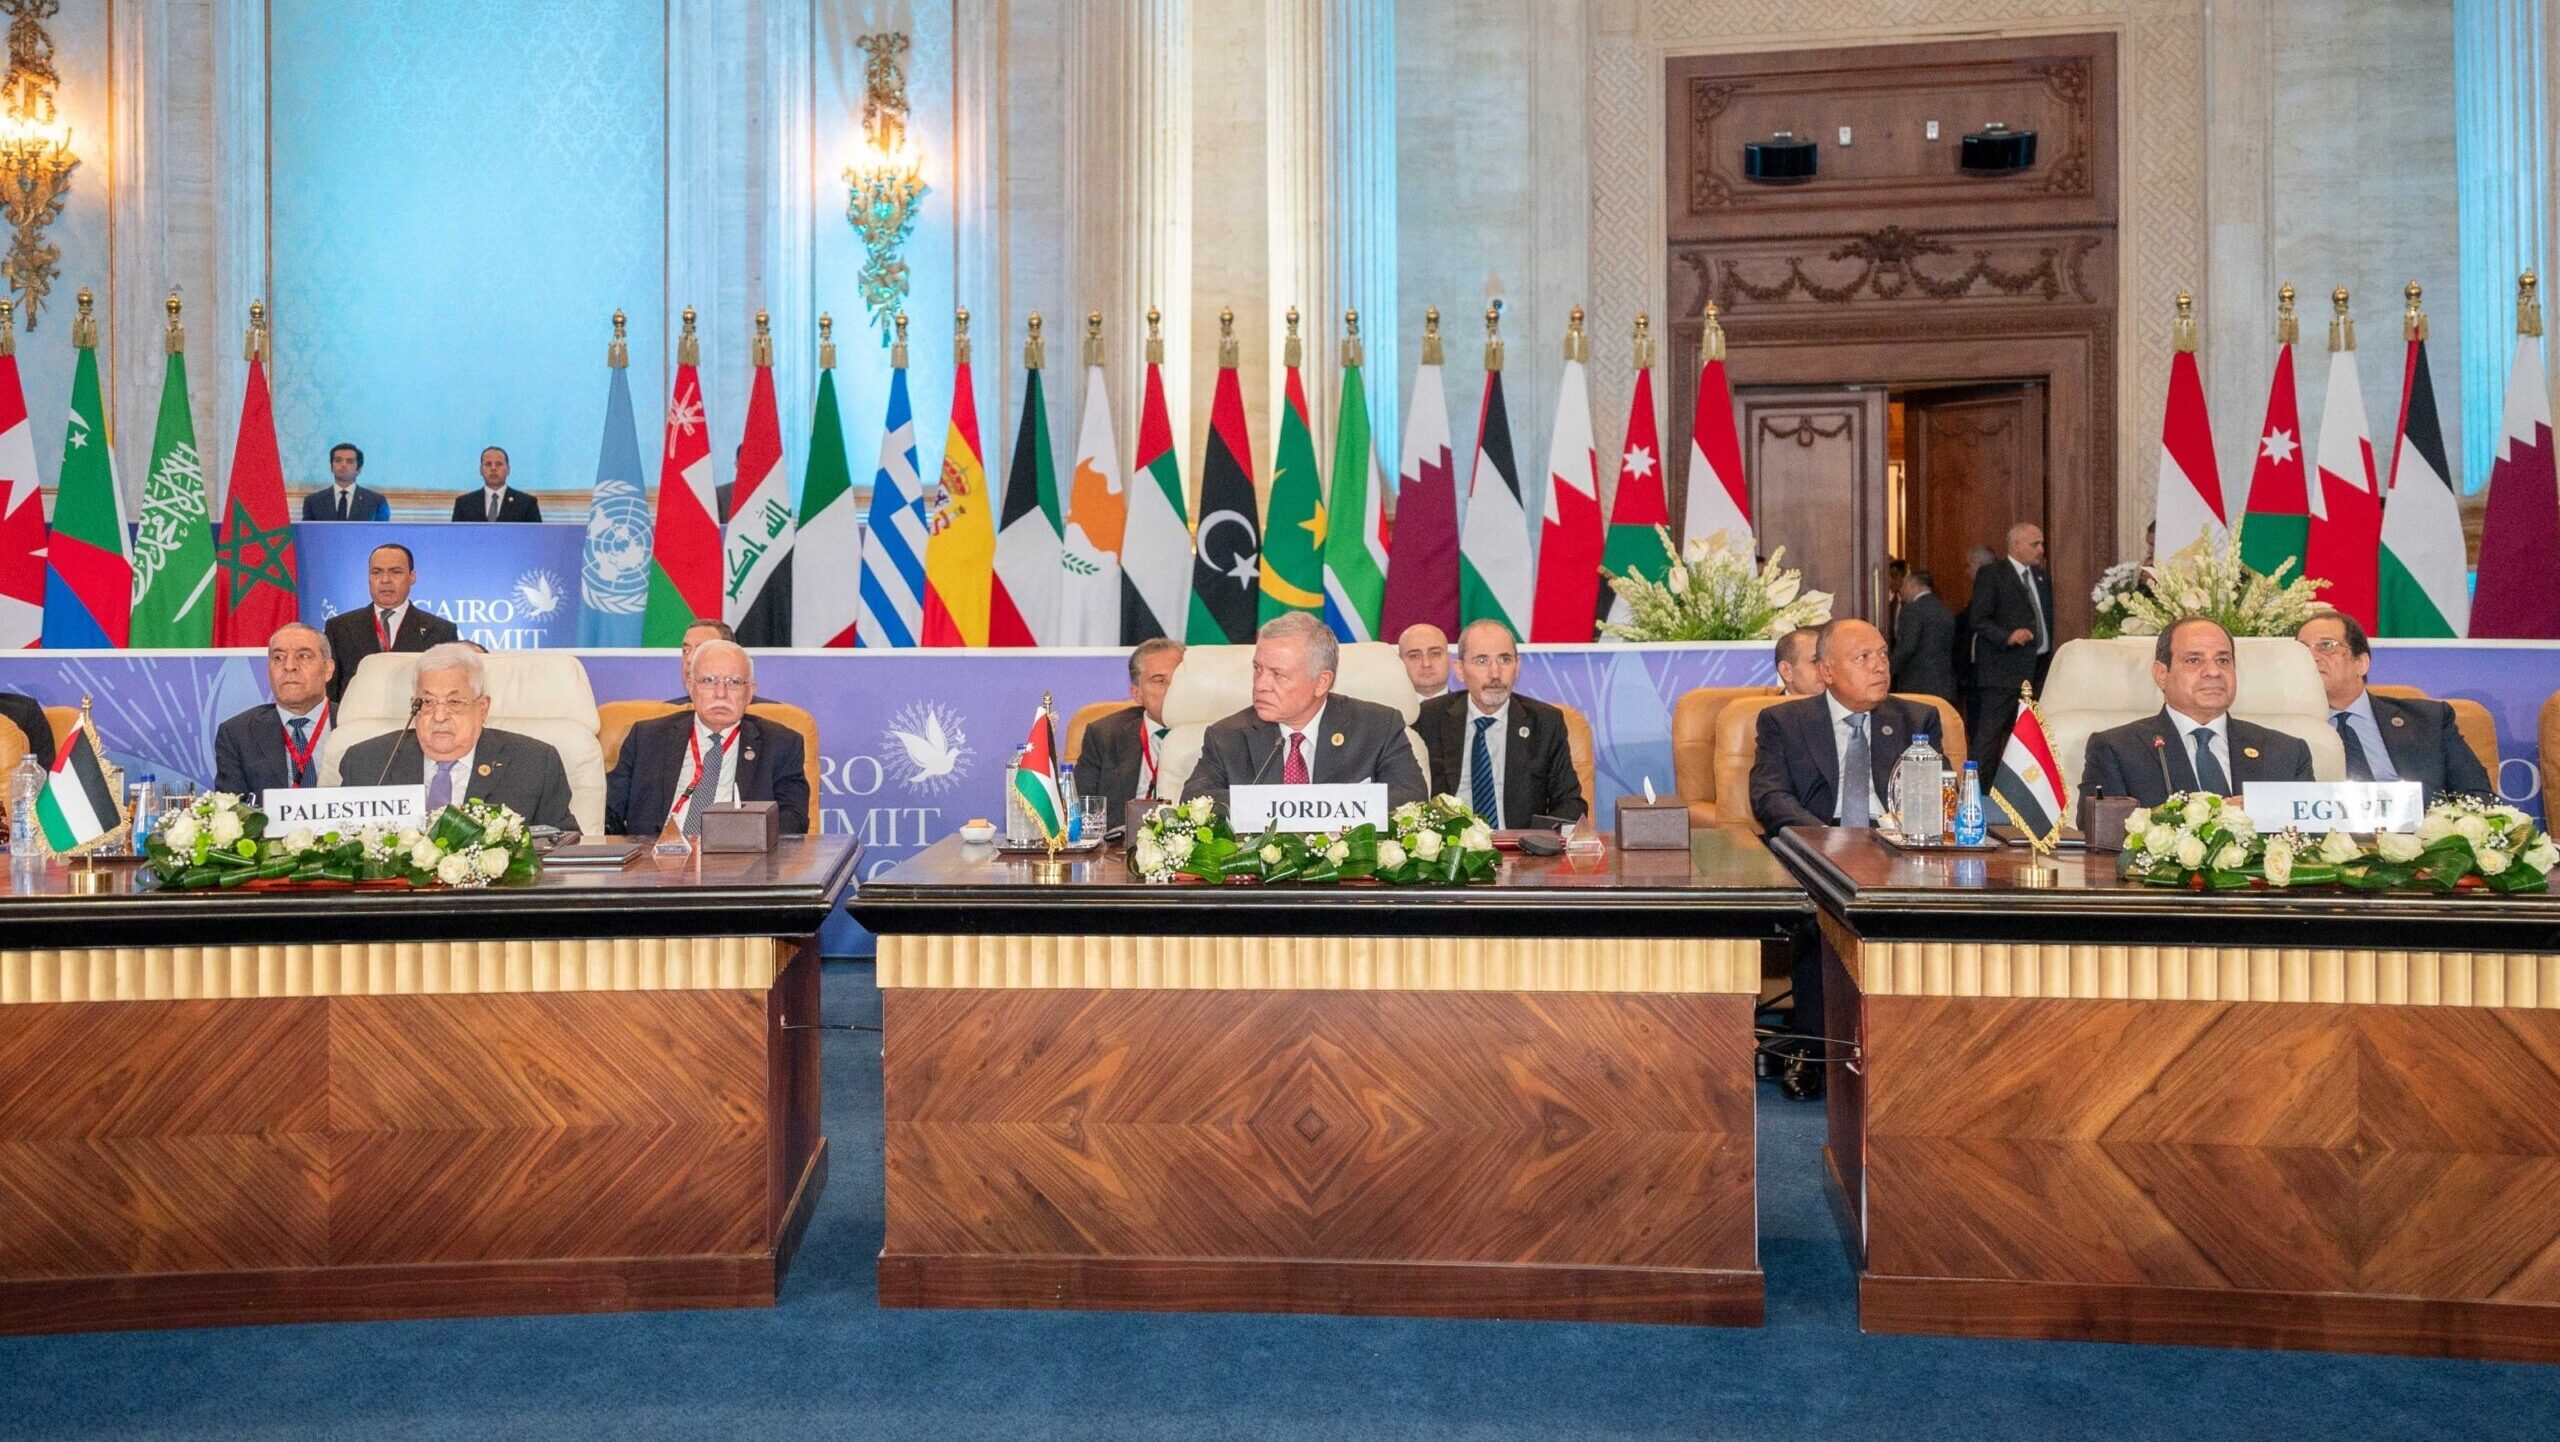 Was el-Sisi’s Cairo Peace Summit a Paradigm Shift for Palestinians or Toothless Diplomacy?